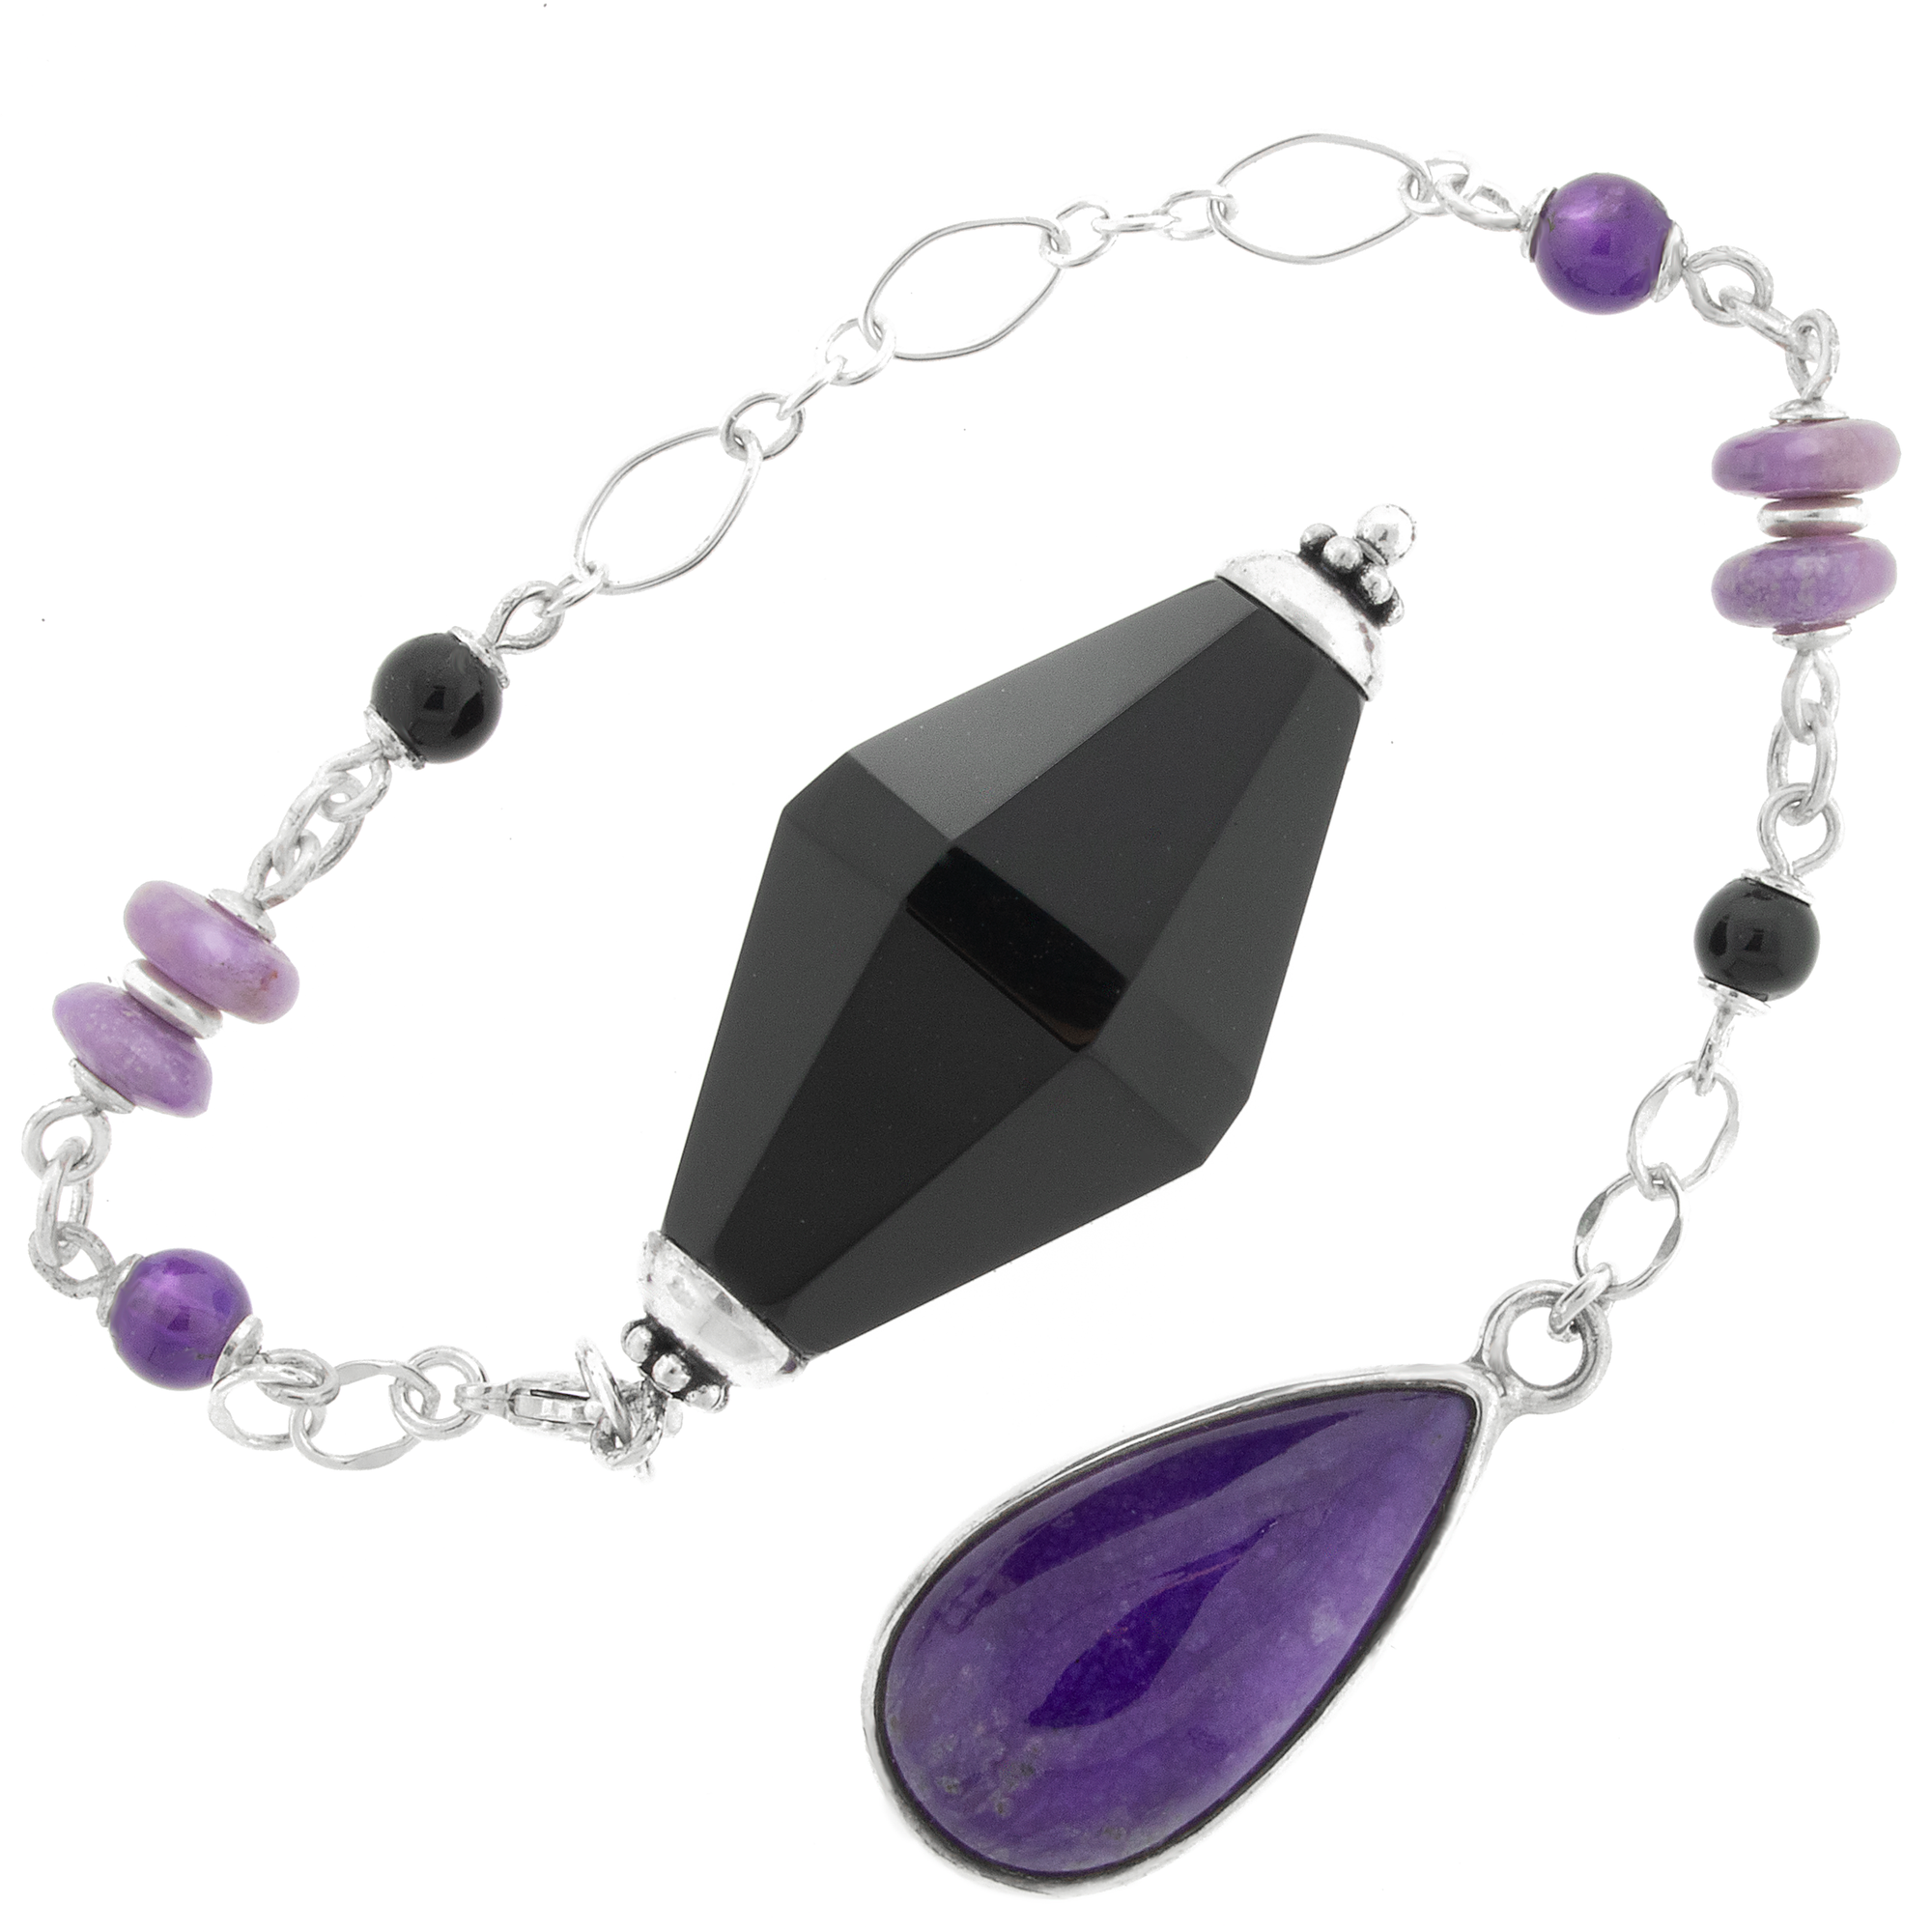 One of a Kind #363 - Black Agate, Amethyst, Sugilite, Black Obsidian and Sterling Silver Pendulum by Ask Your Pendulum